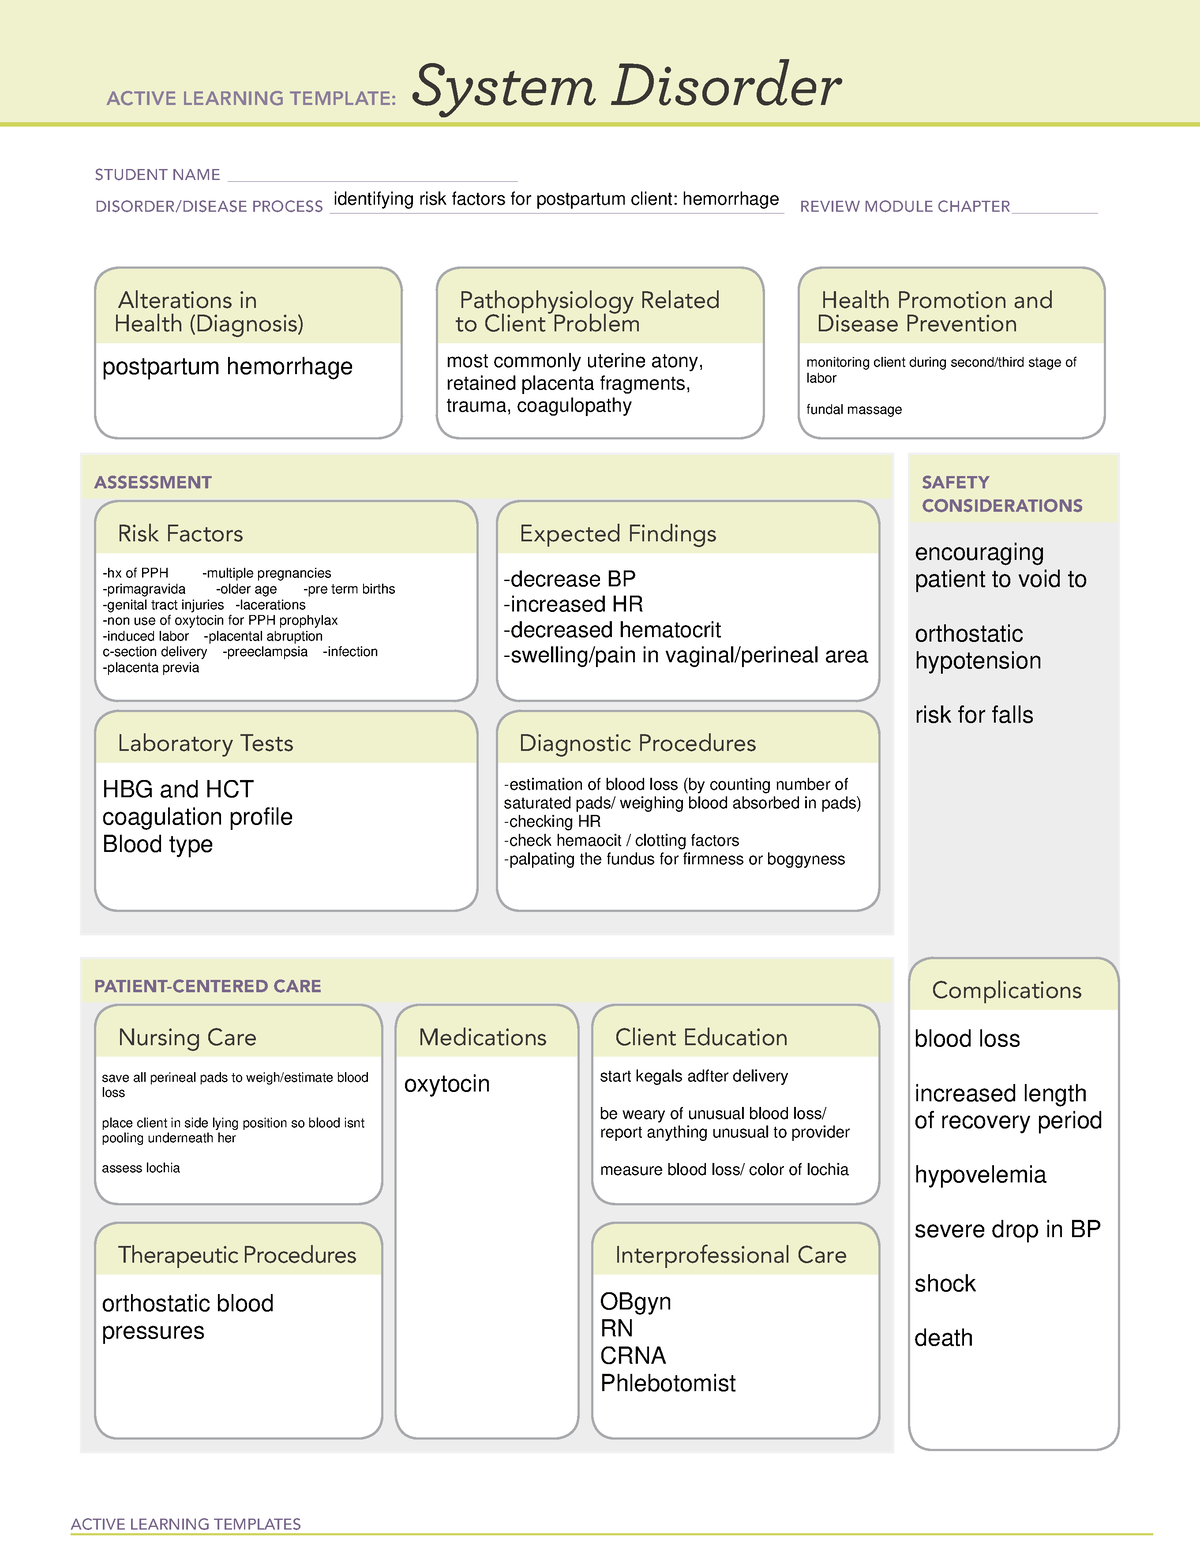 postpartum hemorrhage ati template ACTIVE LEARNING TEMPLATES System